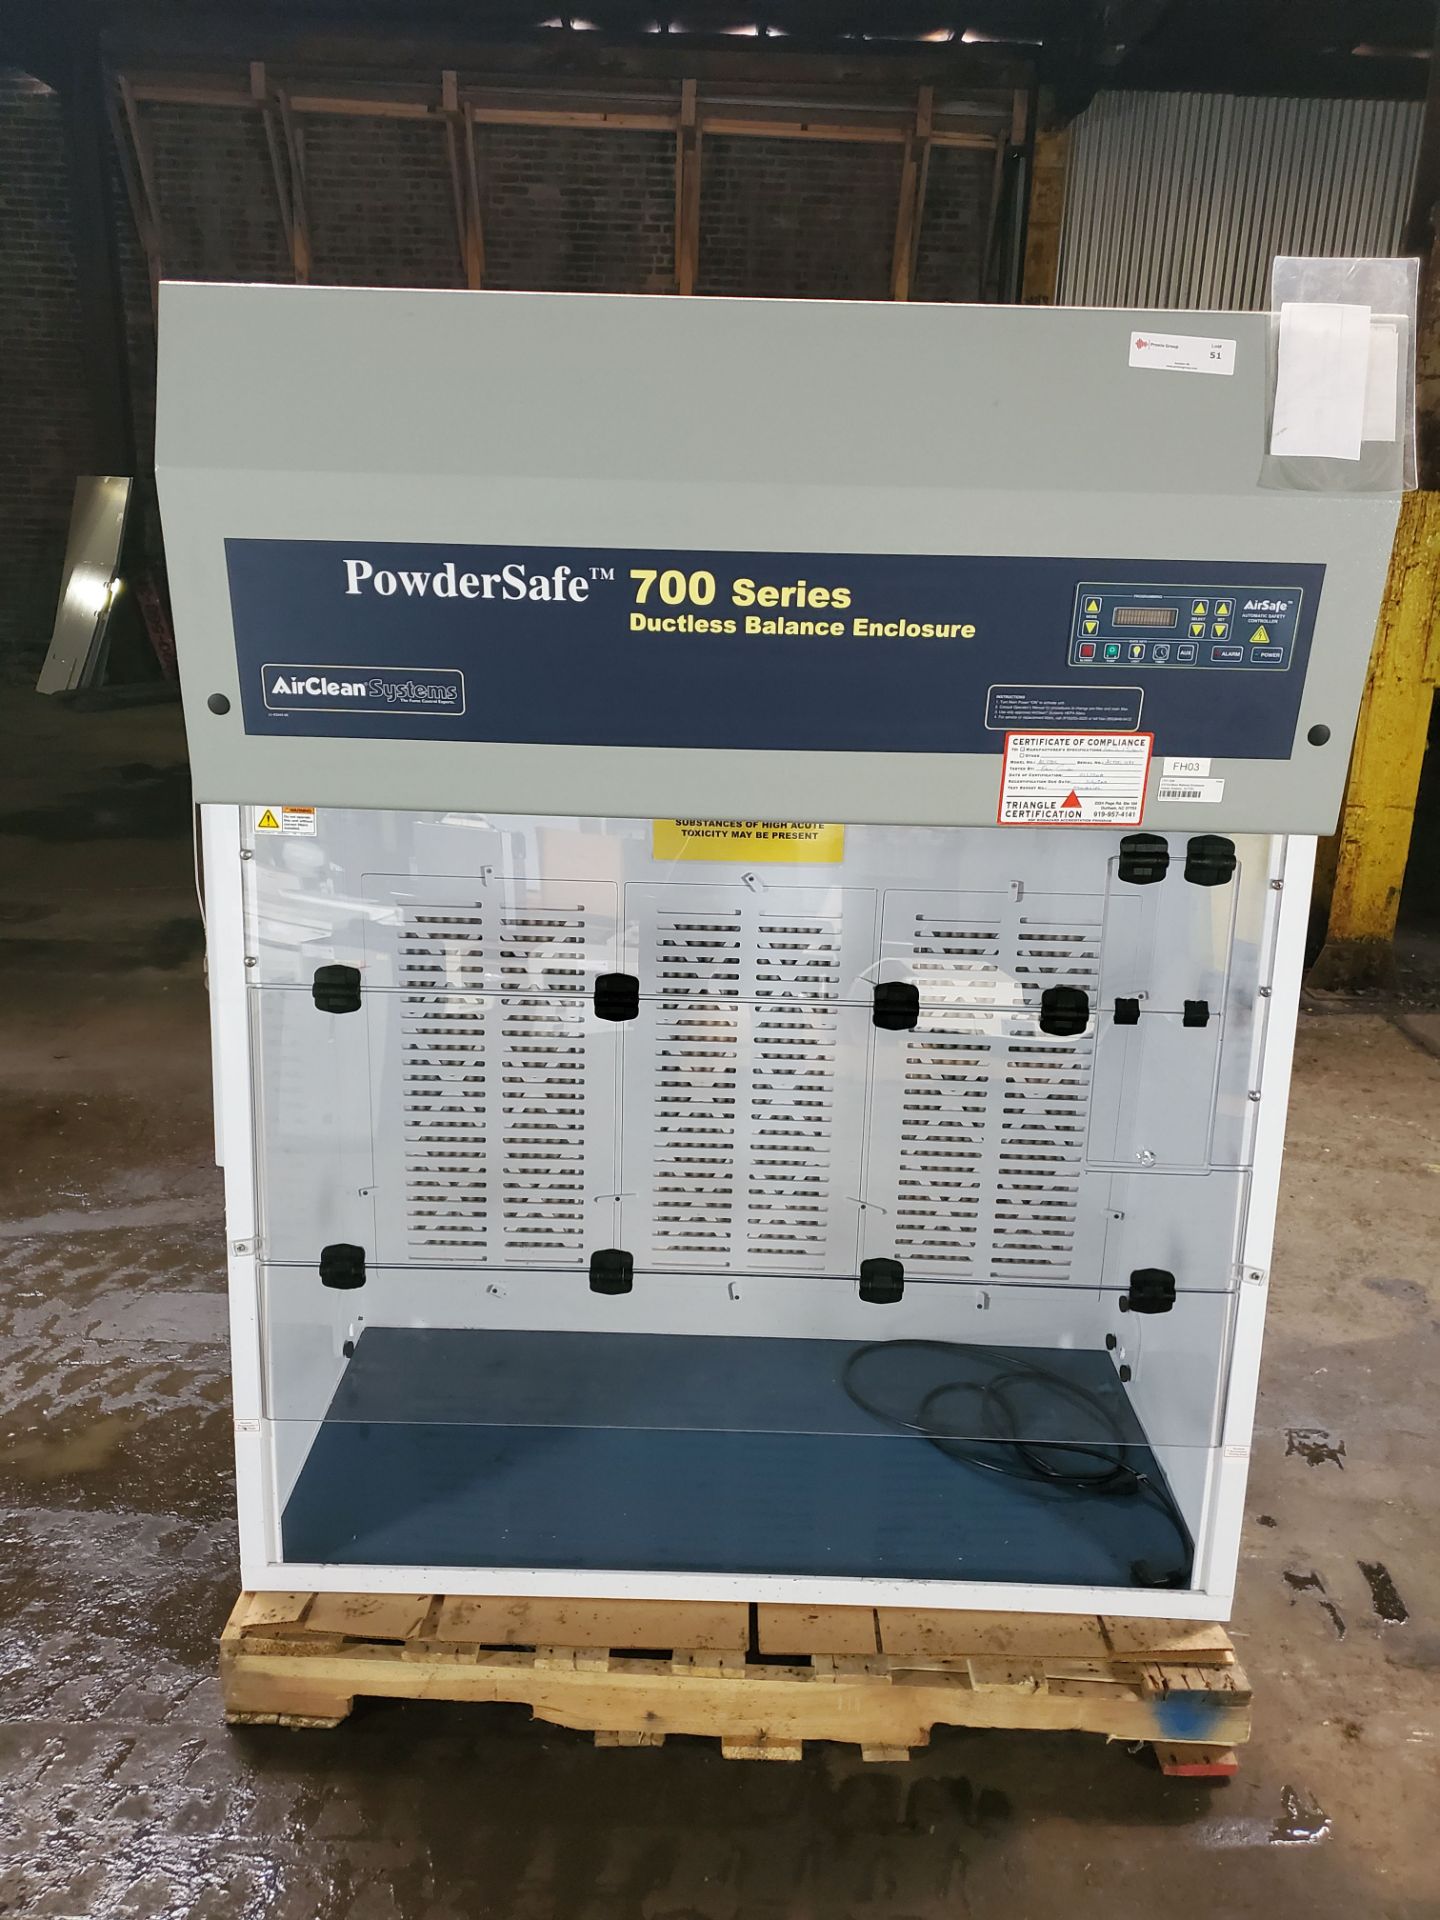 PowderSafe 700 Series Ductless Balance Enclosure, model AC775C, with controls.